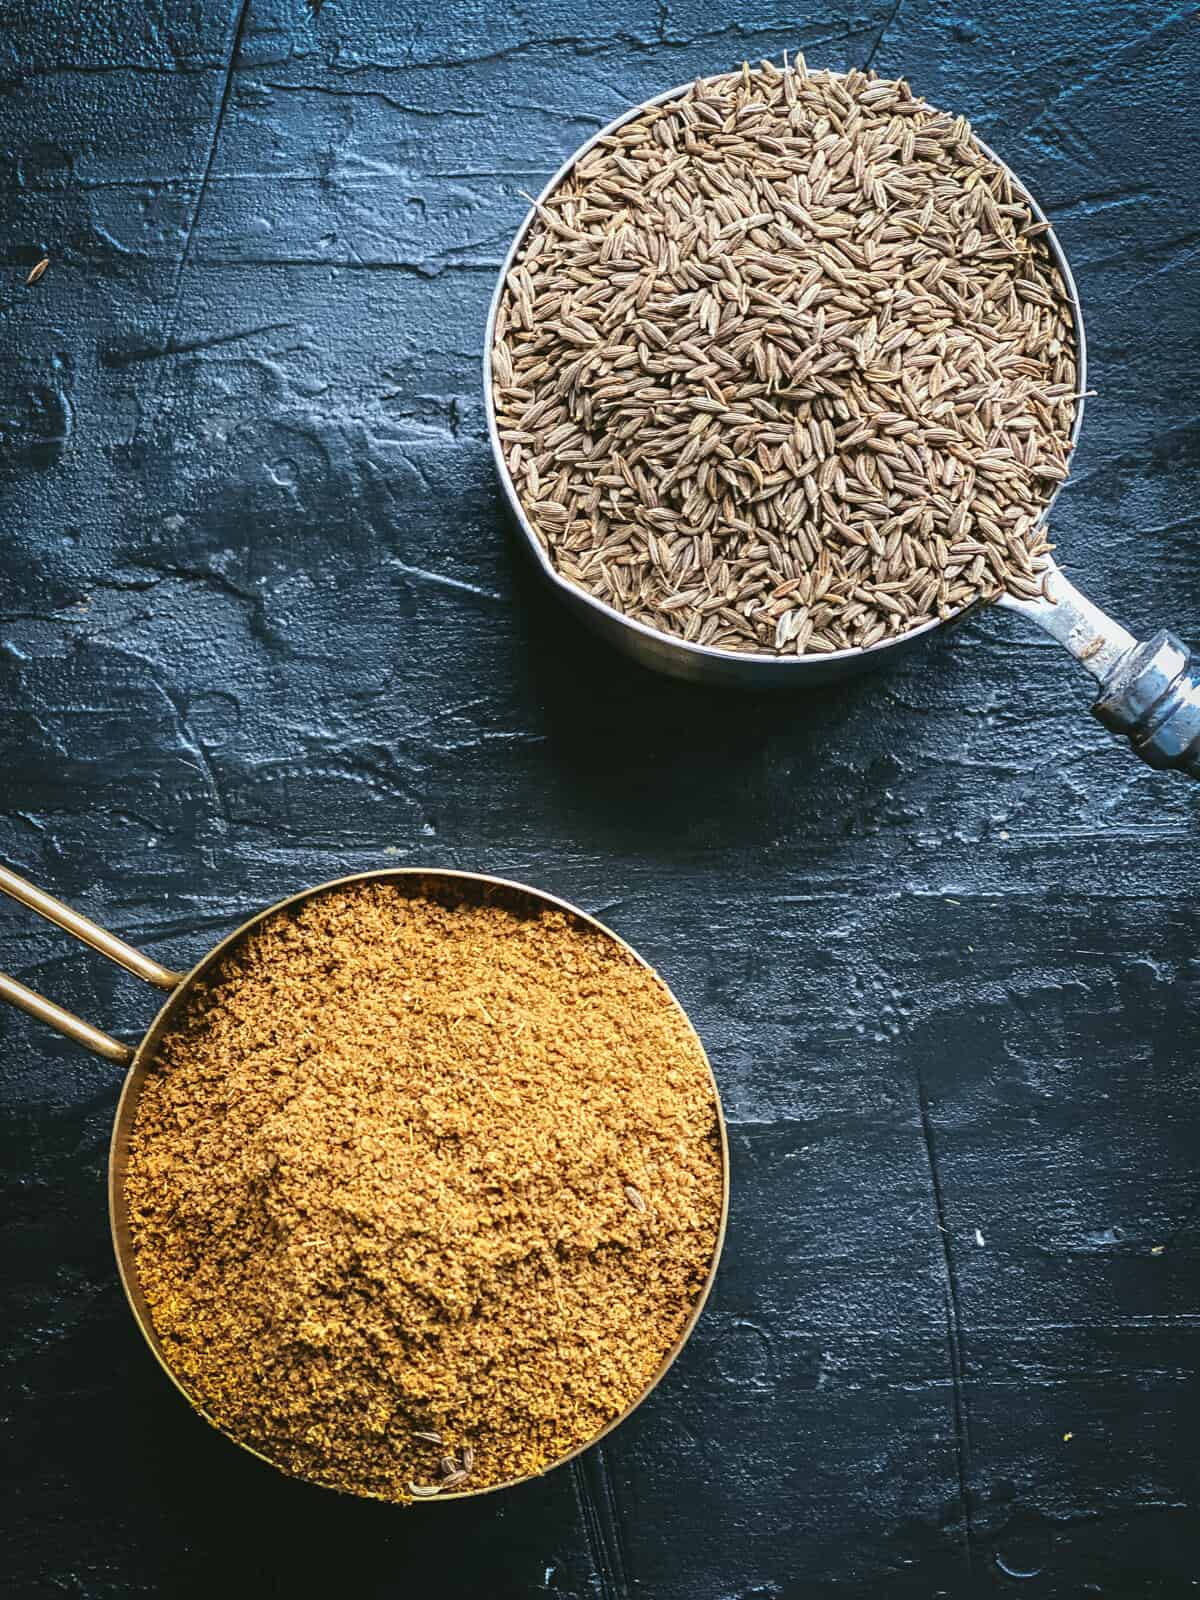 Two measuring cups: one with cumin seeds, and the other with ground cumin powder.